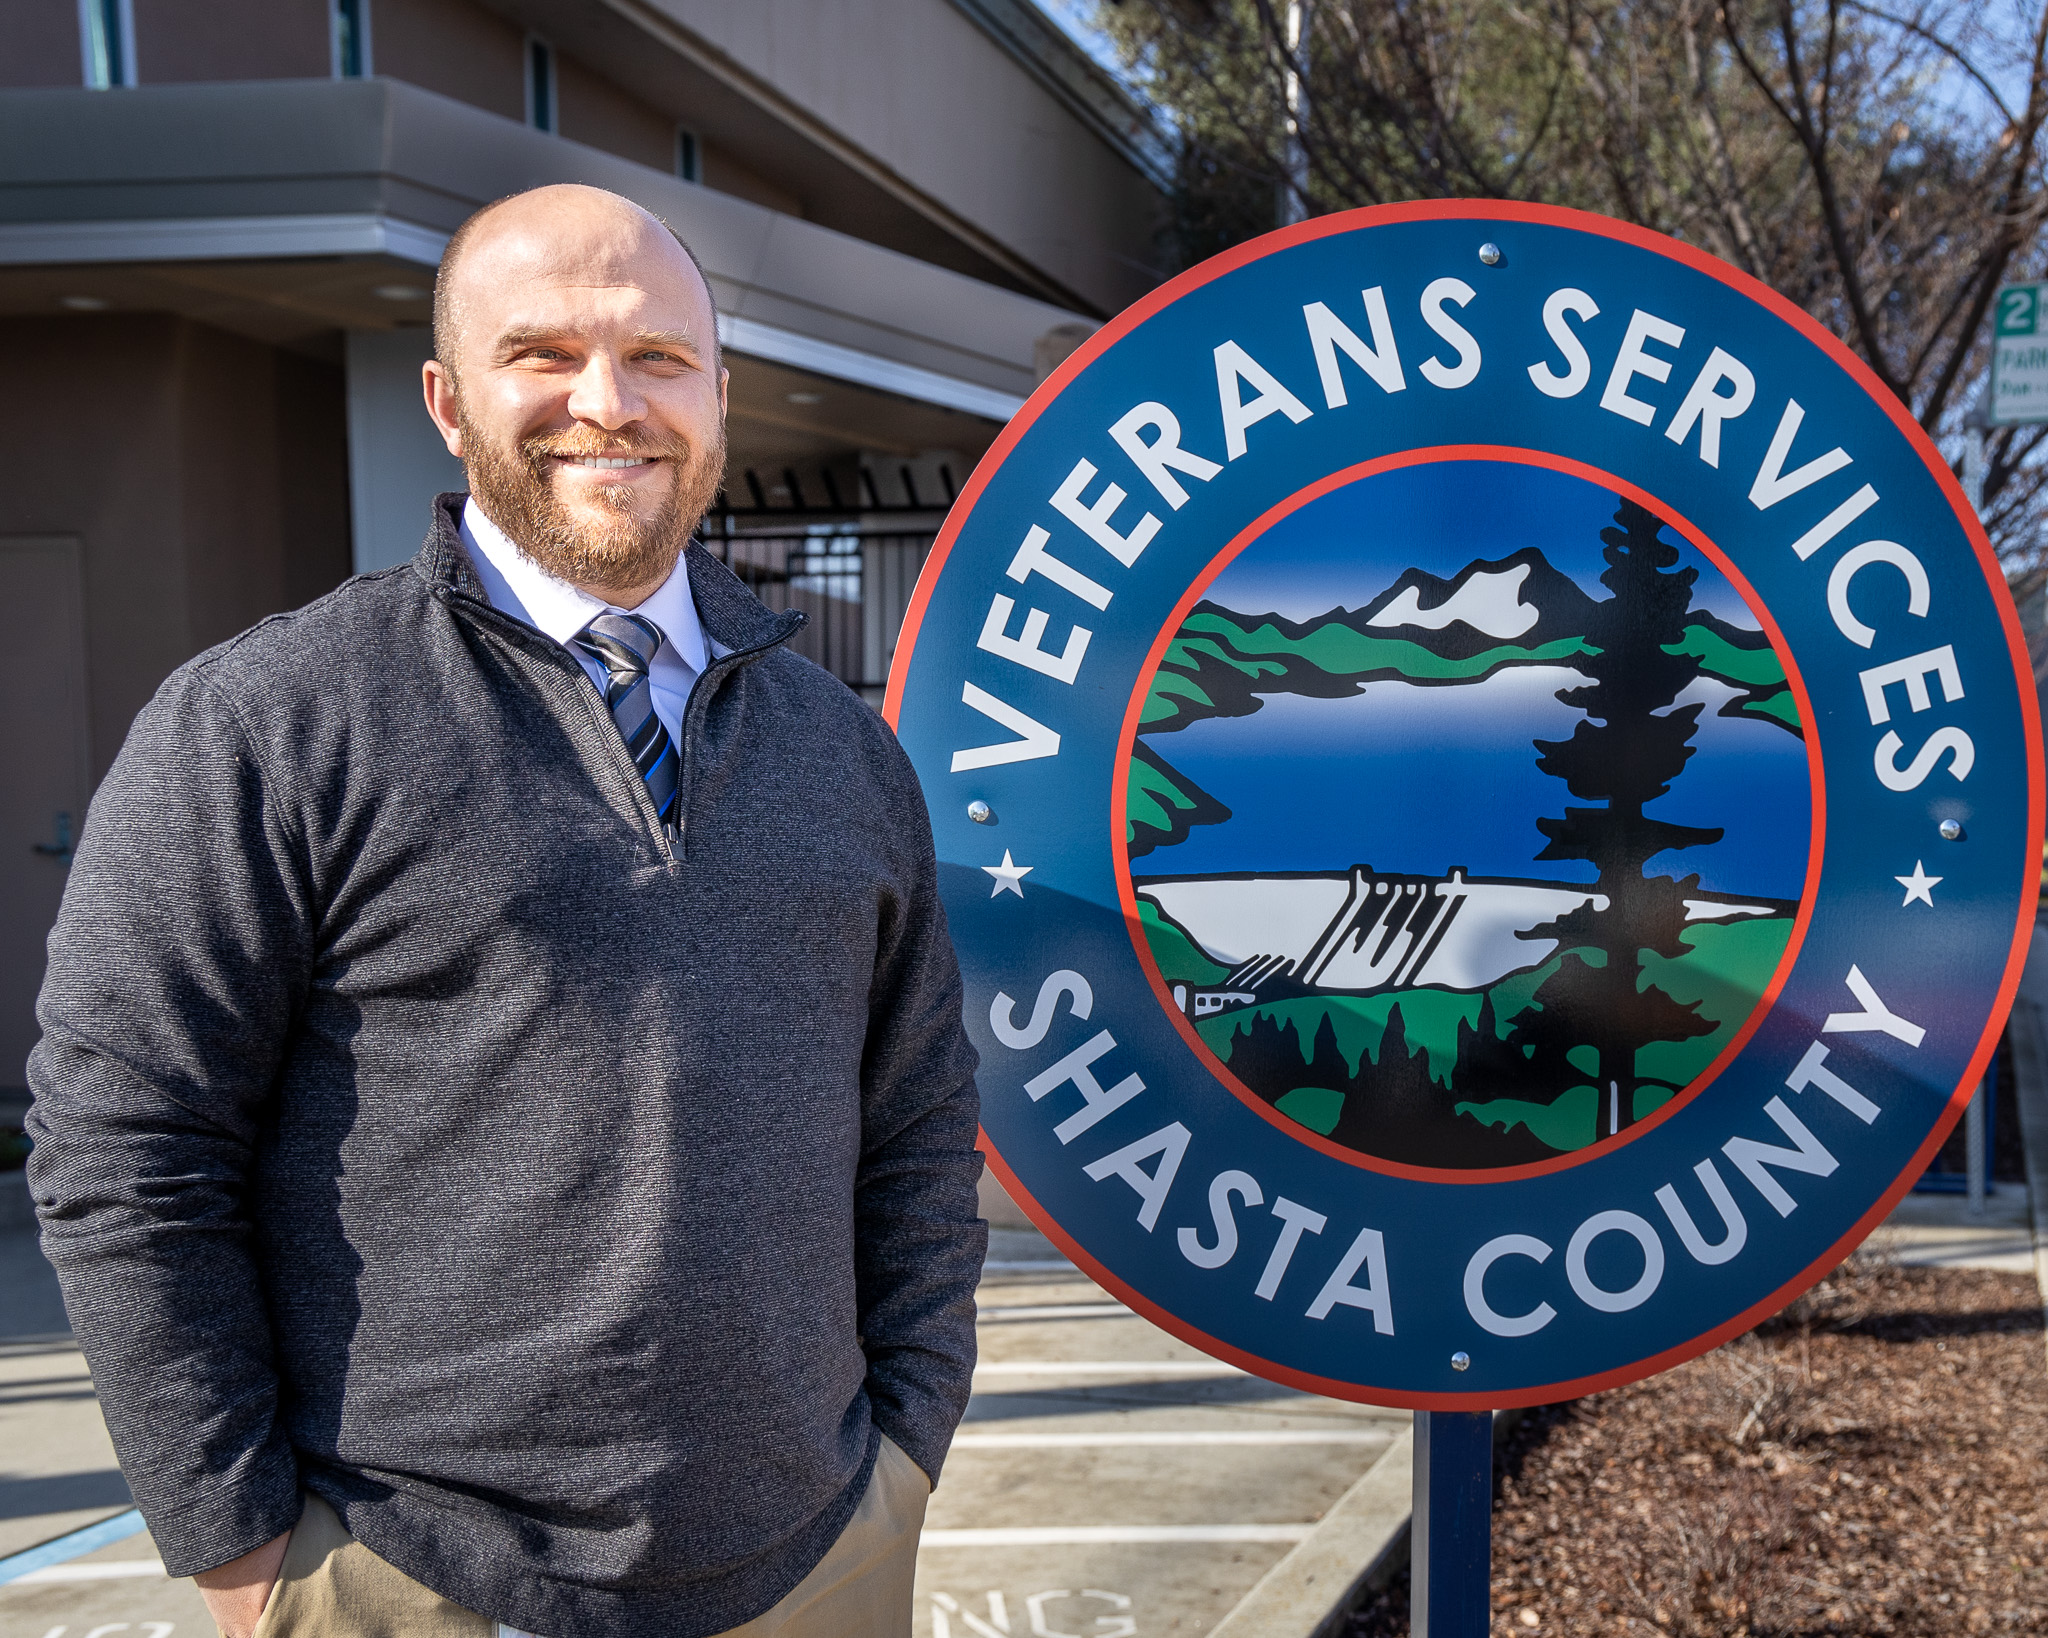 Shasta County Wesley Tucker as New Veterans Services Officer